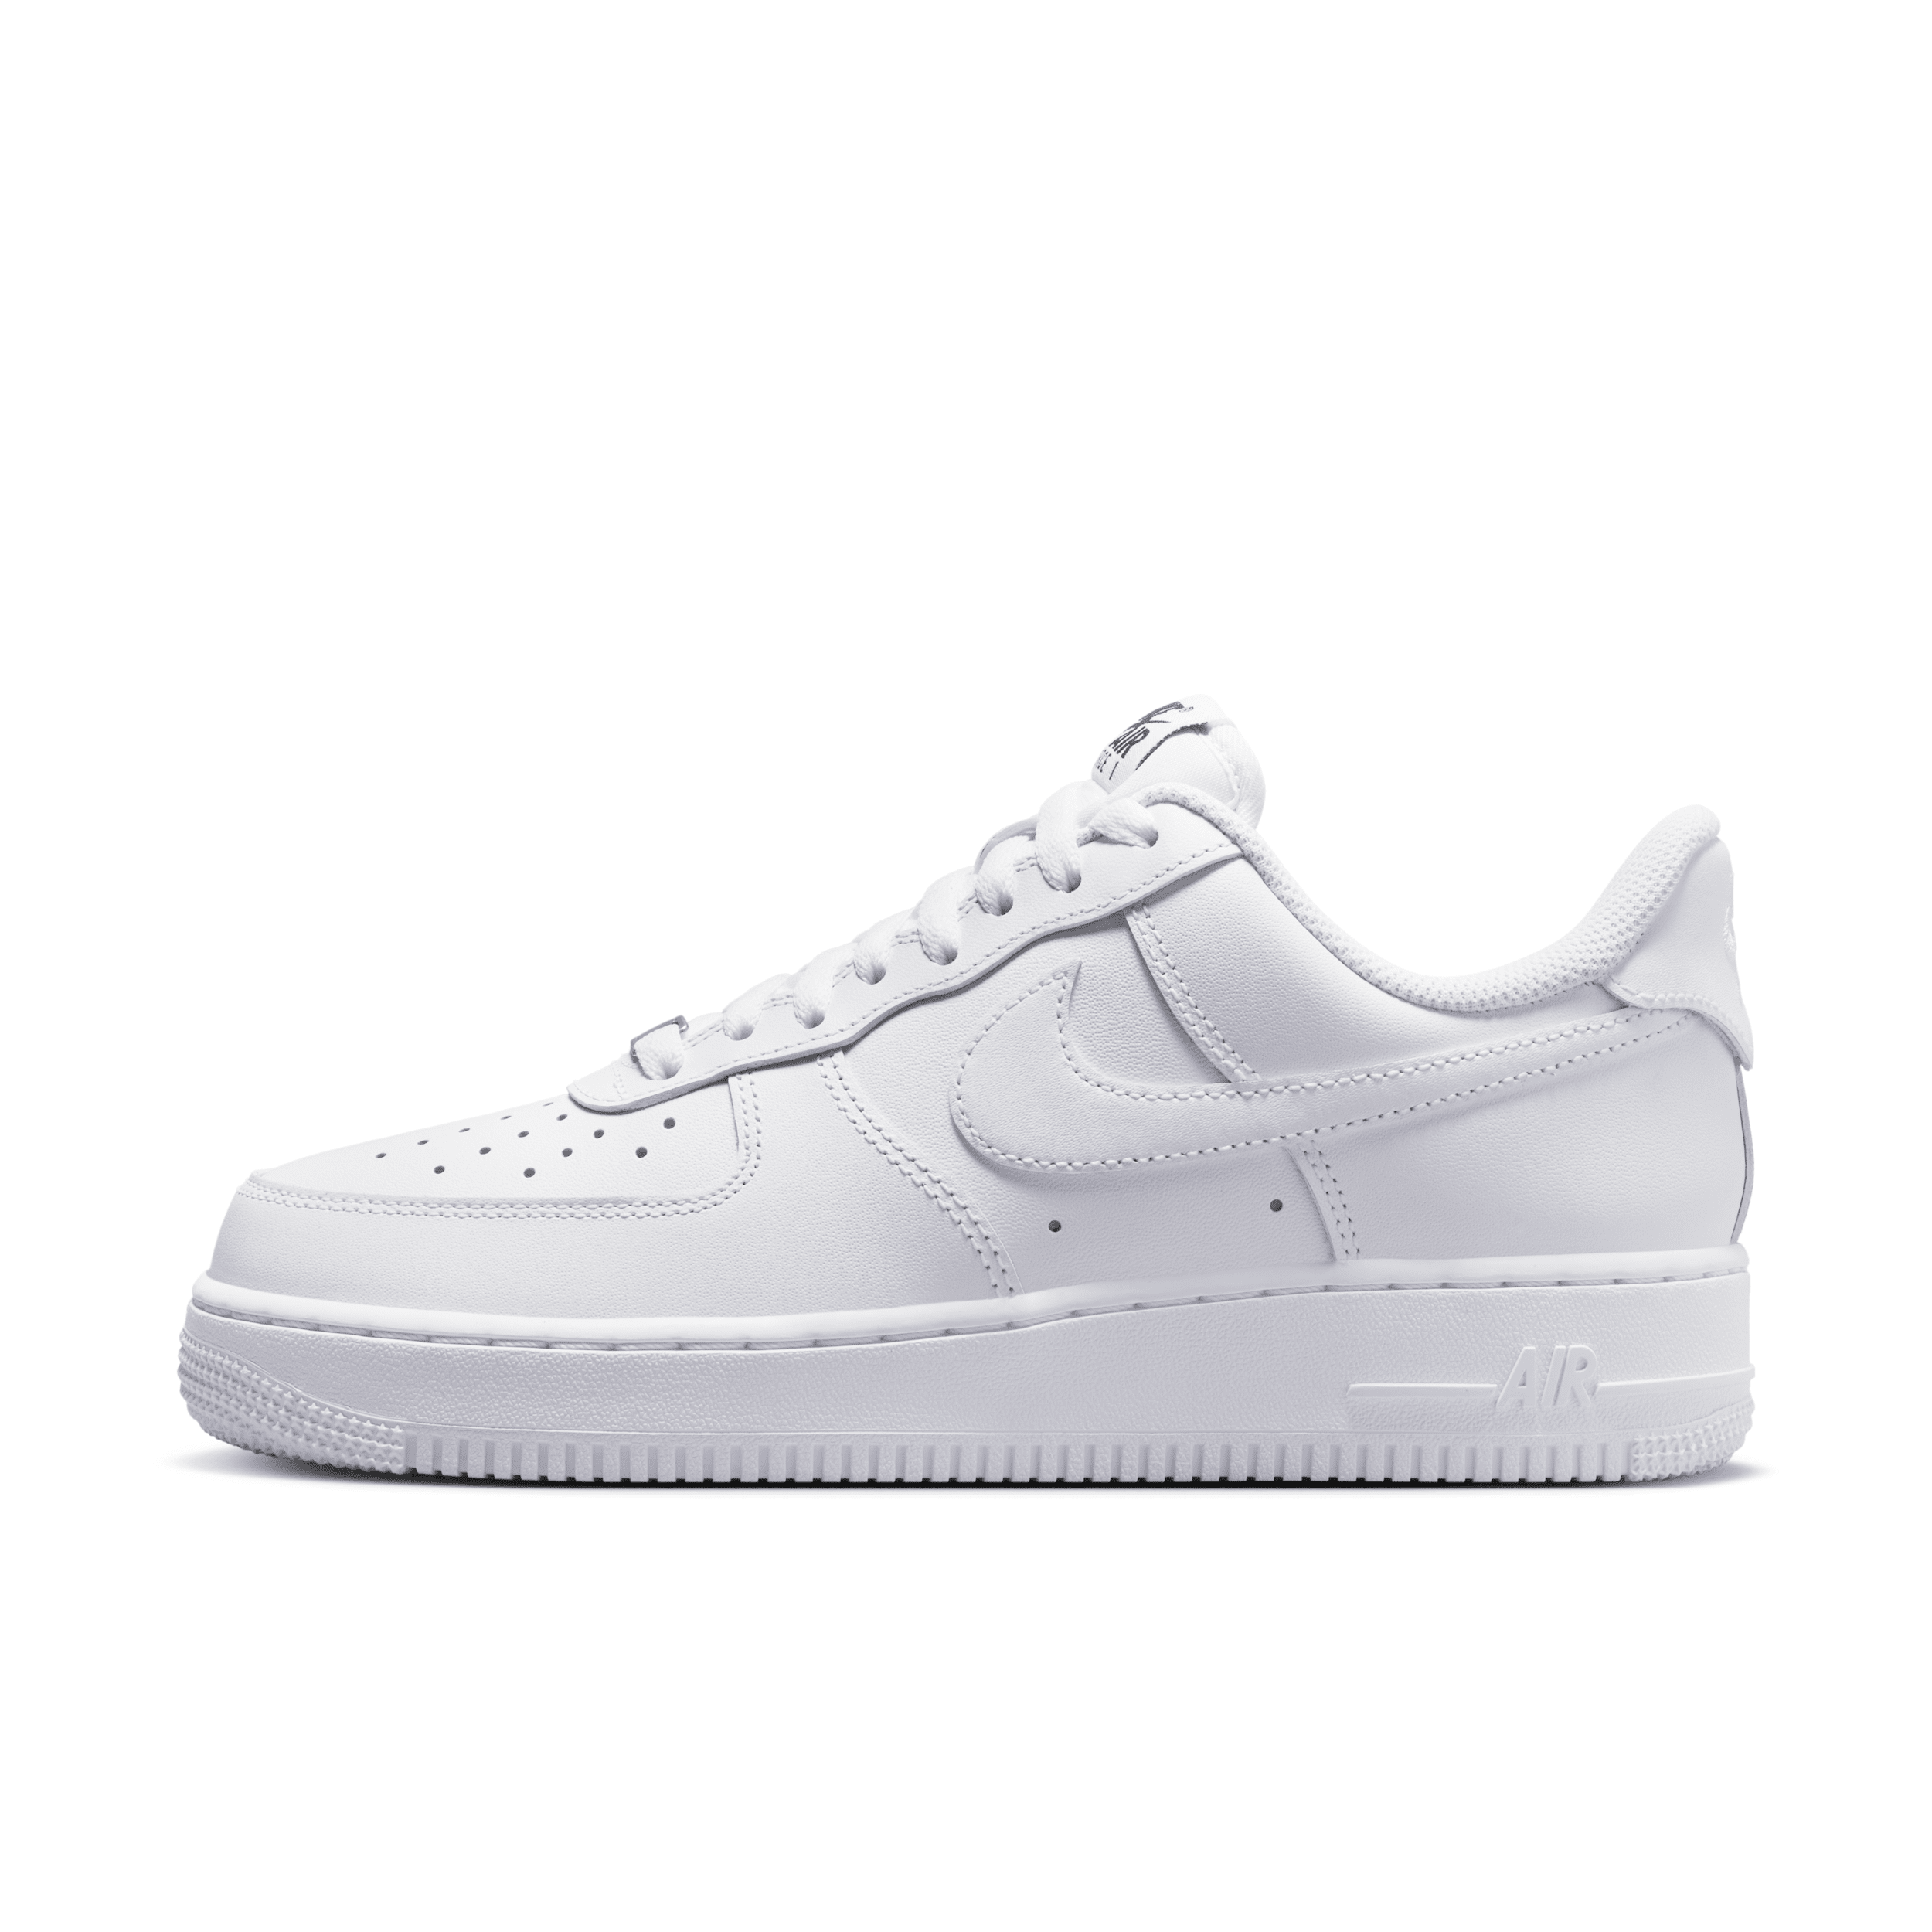 Nike Women's Air Force 1 '07 EasyOn Shoes in White, Size: 12 | DX5883-100